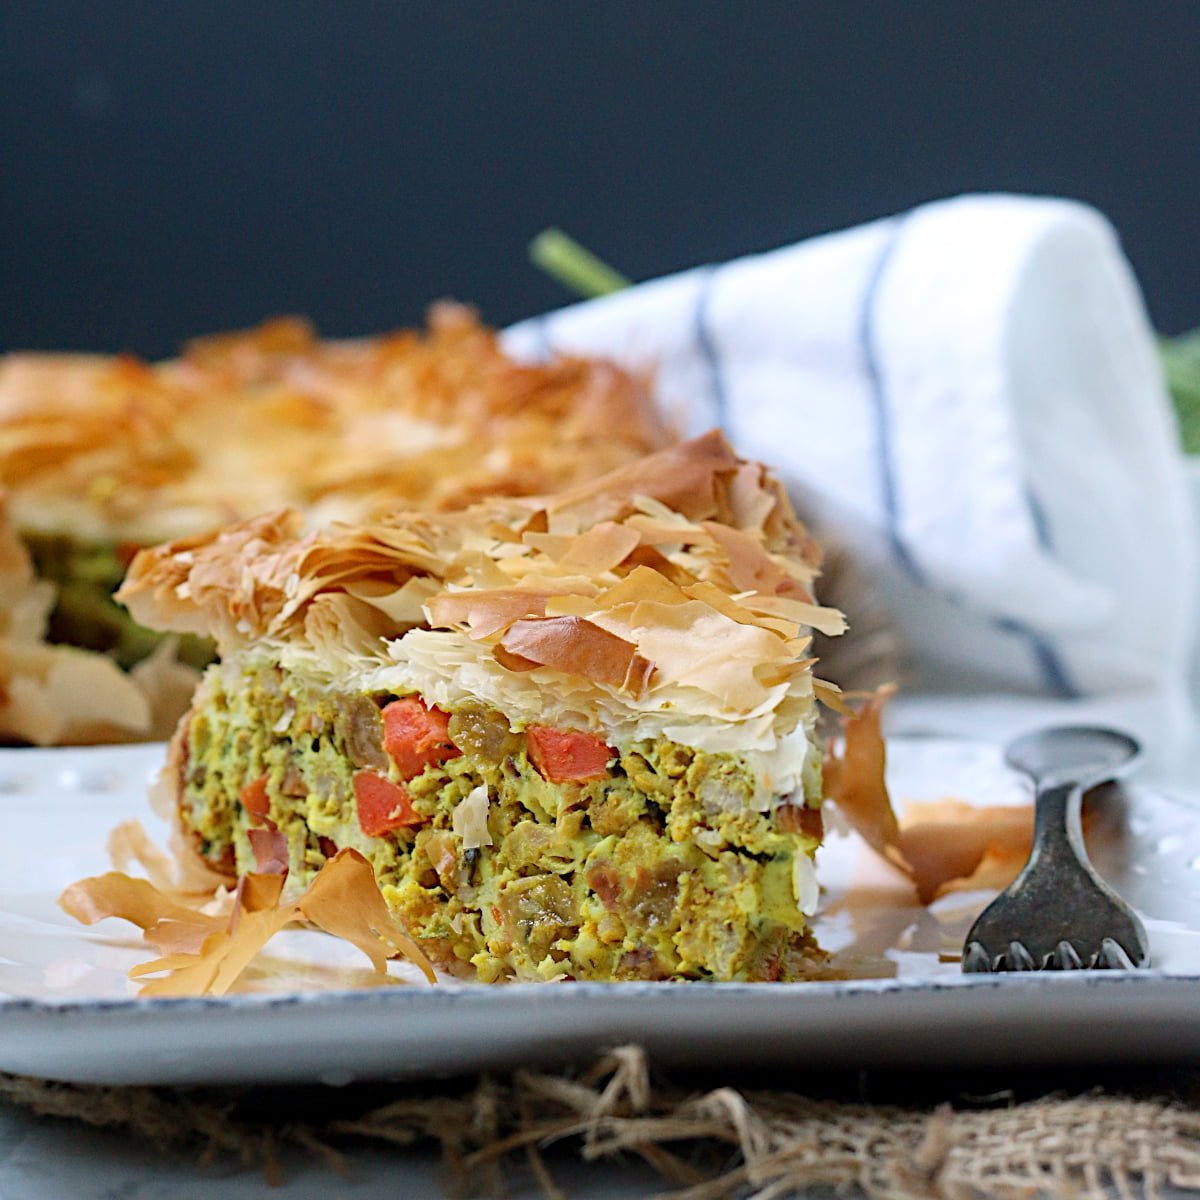 Spiced Meat Pie with Phyllo Crust cropped